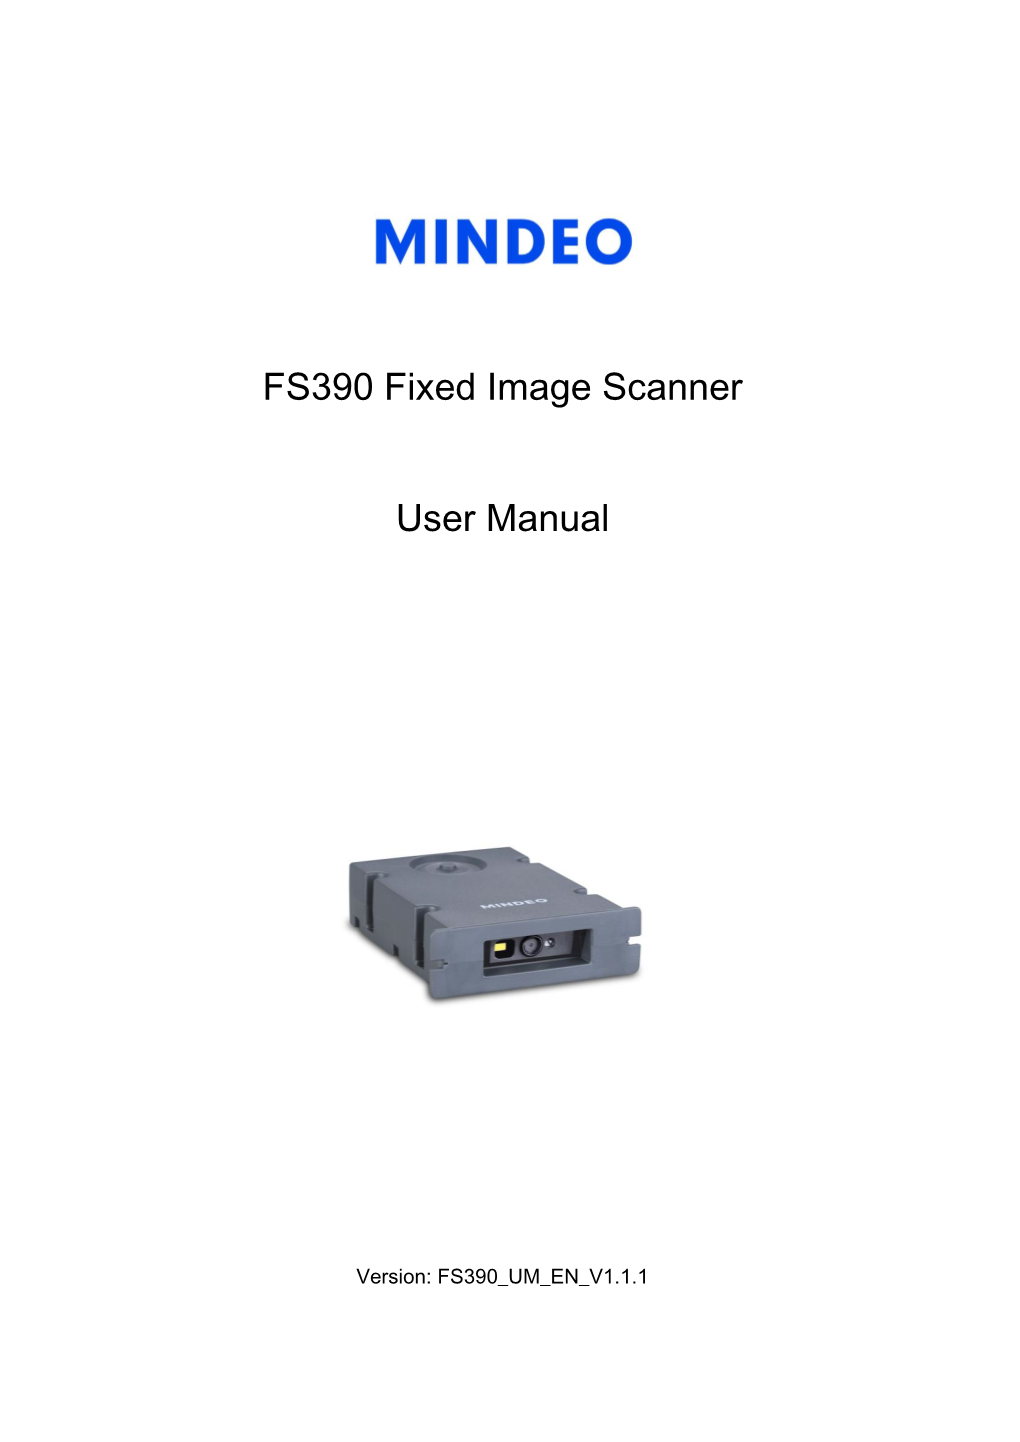 FS390 Fixed Image Scanner User Manual